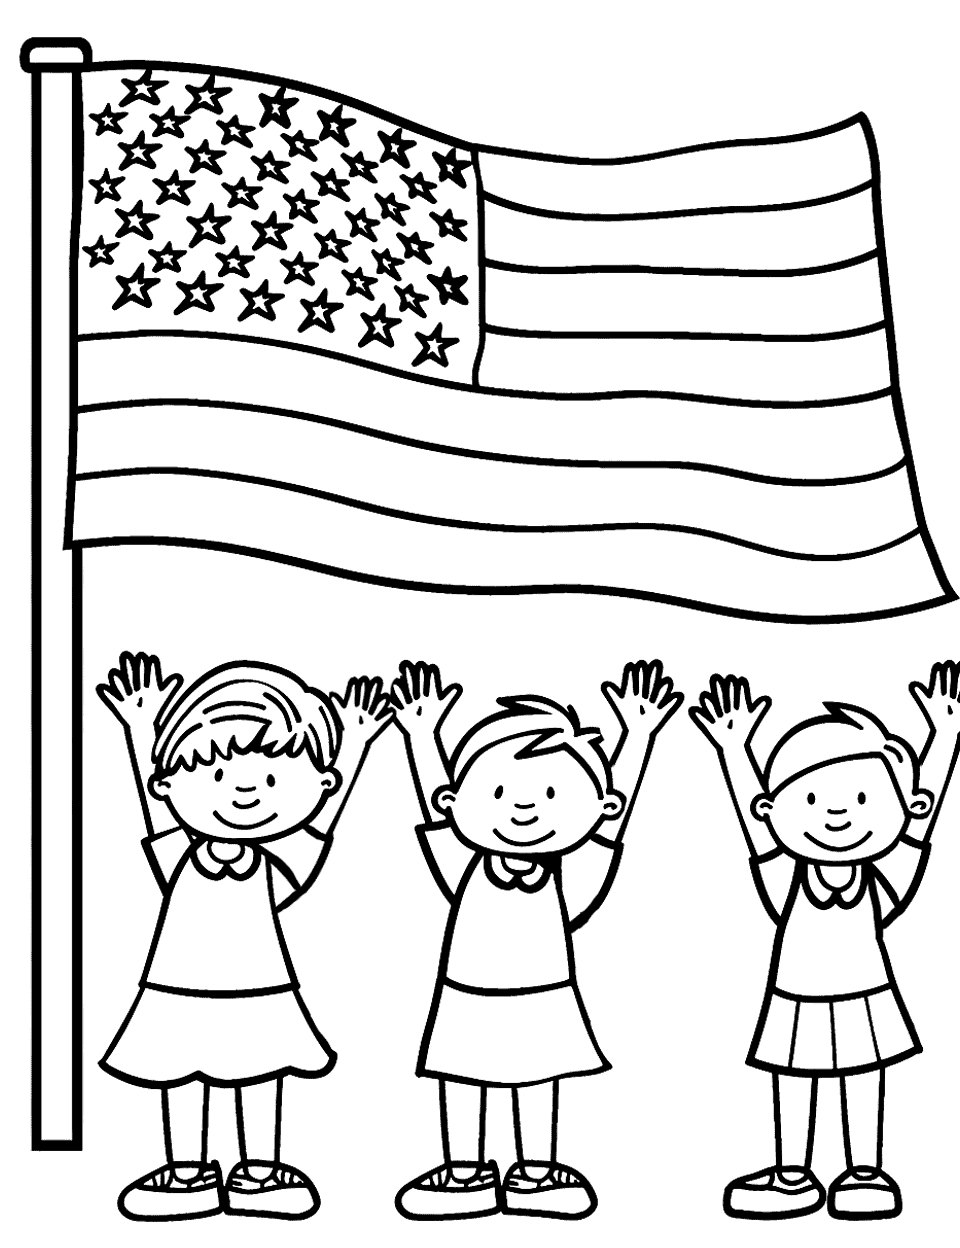 Kids and the Flag American Coloring Page - A group of children in front of the American flag at a school event.